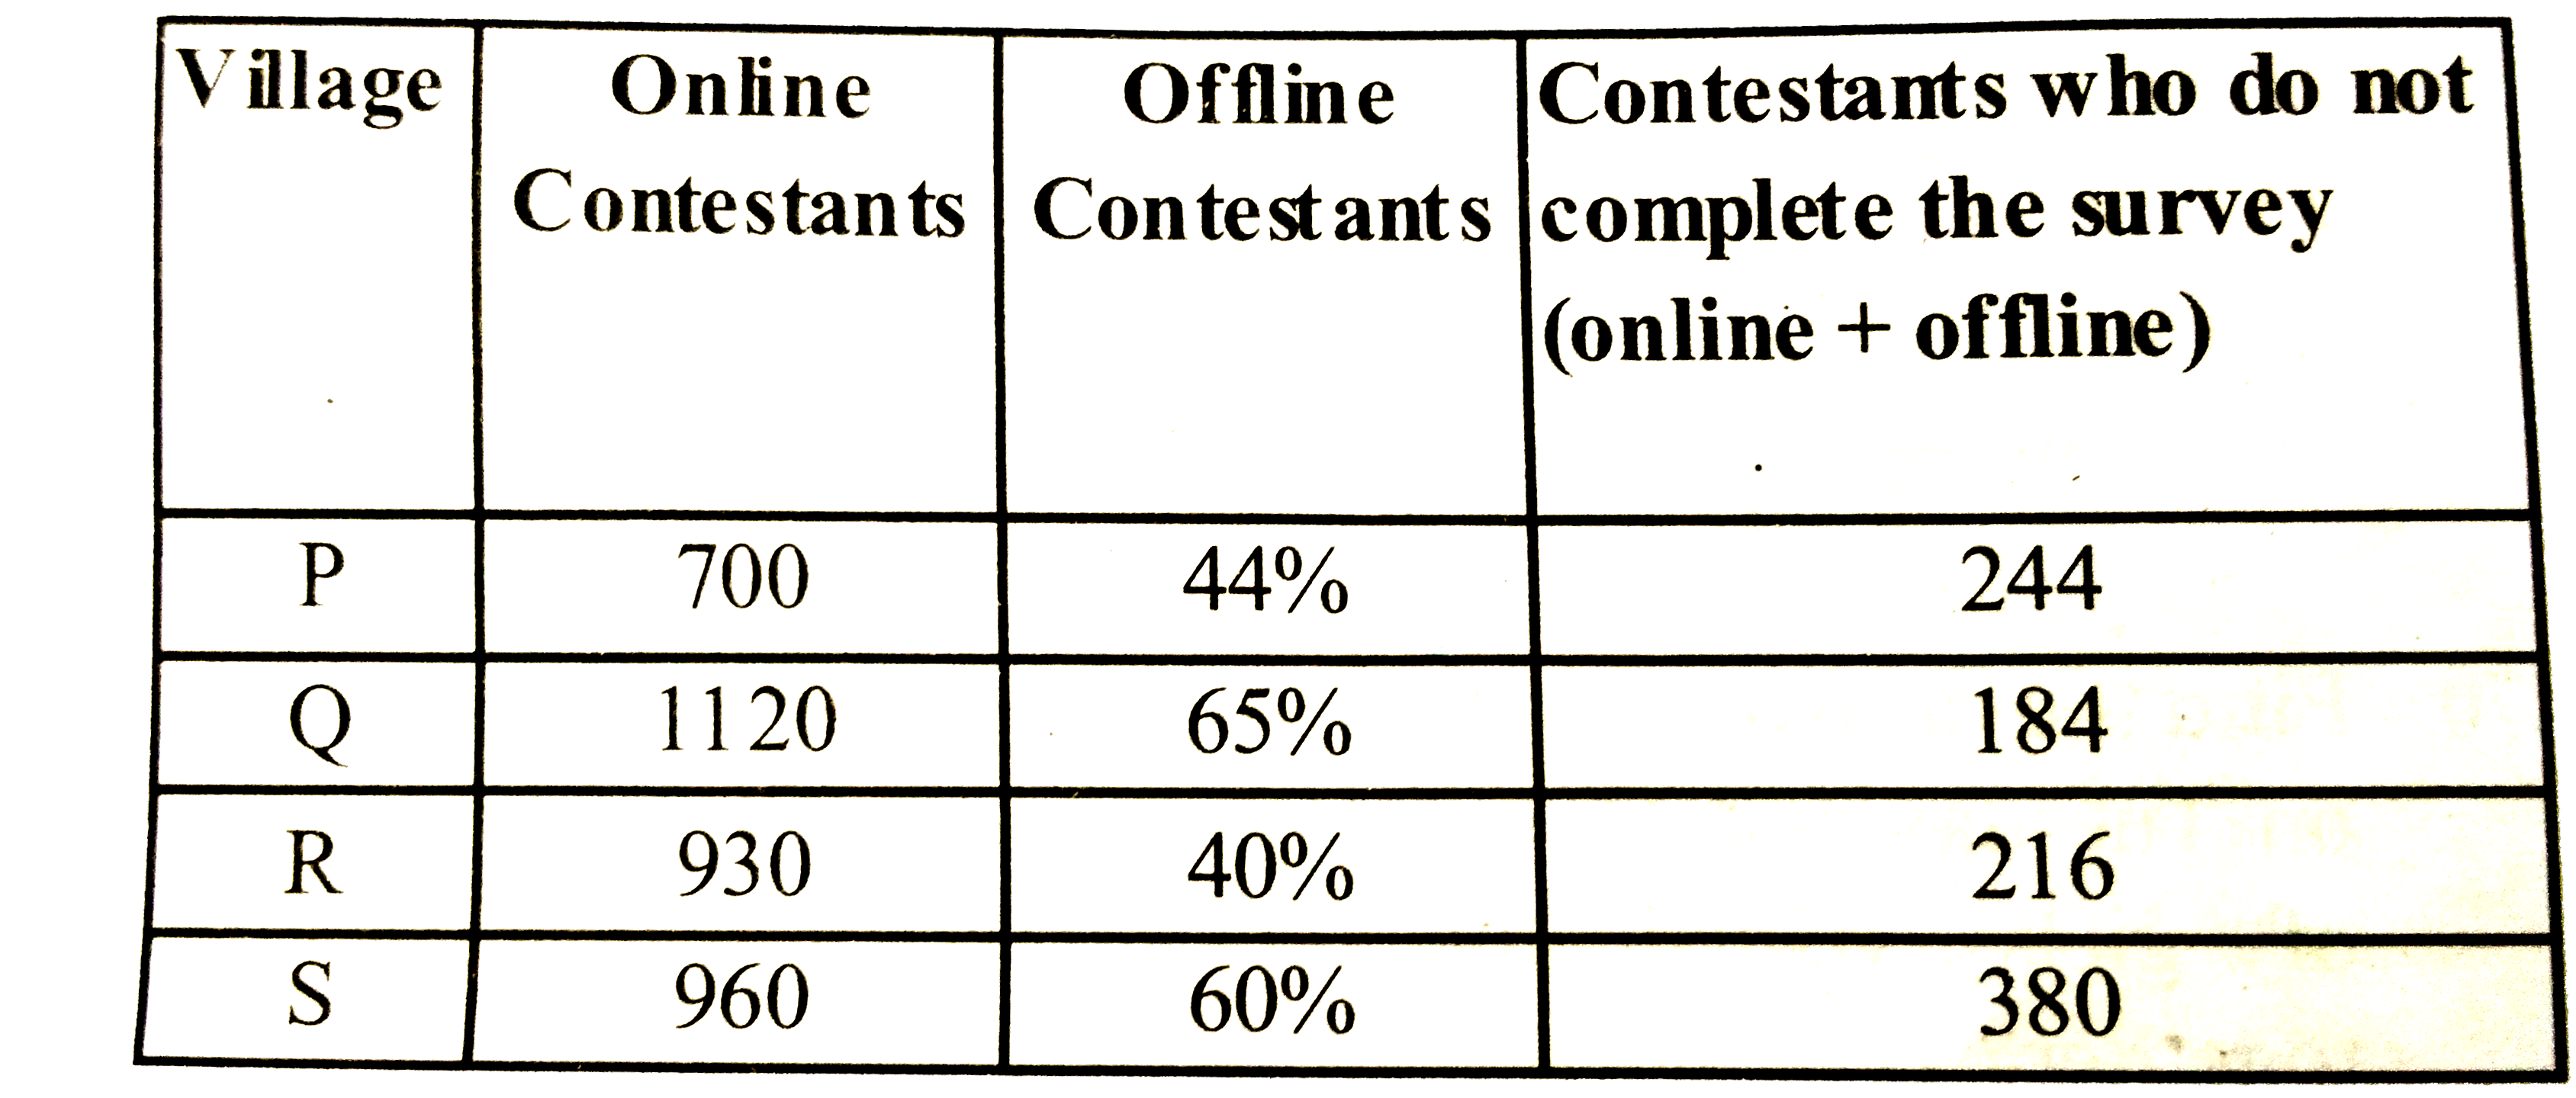 The table shows the online and offline contestants takin part in a survey from four villages and total contestant who hae not completed the survey (online and offline)   Note 1:  Total contestants in a villages= Online onstestants+ Offline contestants   2 : Total contestants in a village = Constestant who complete the survey + contestants who do not complete survery      In village P, if the number of online and offline contestants who didn't complete the survey are equal, then online contestans from village P who completed the surevery are what percent (approximate) more than offline contestants who completed the survery from the same village ?